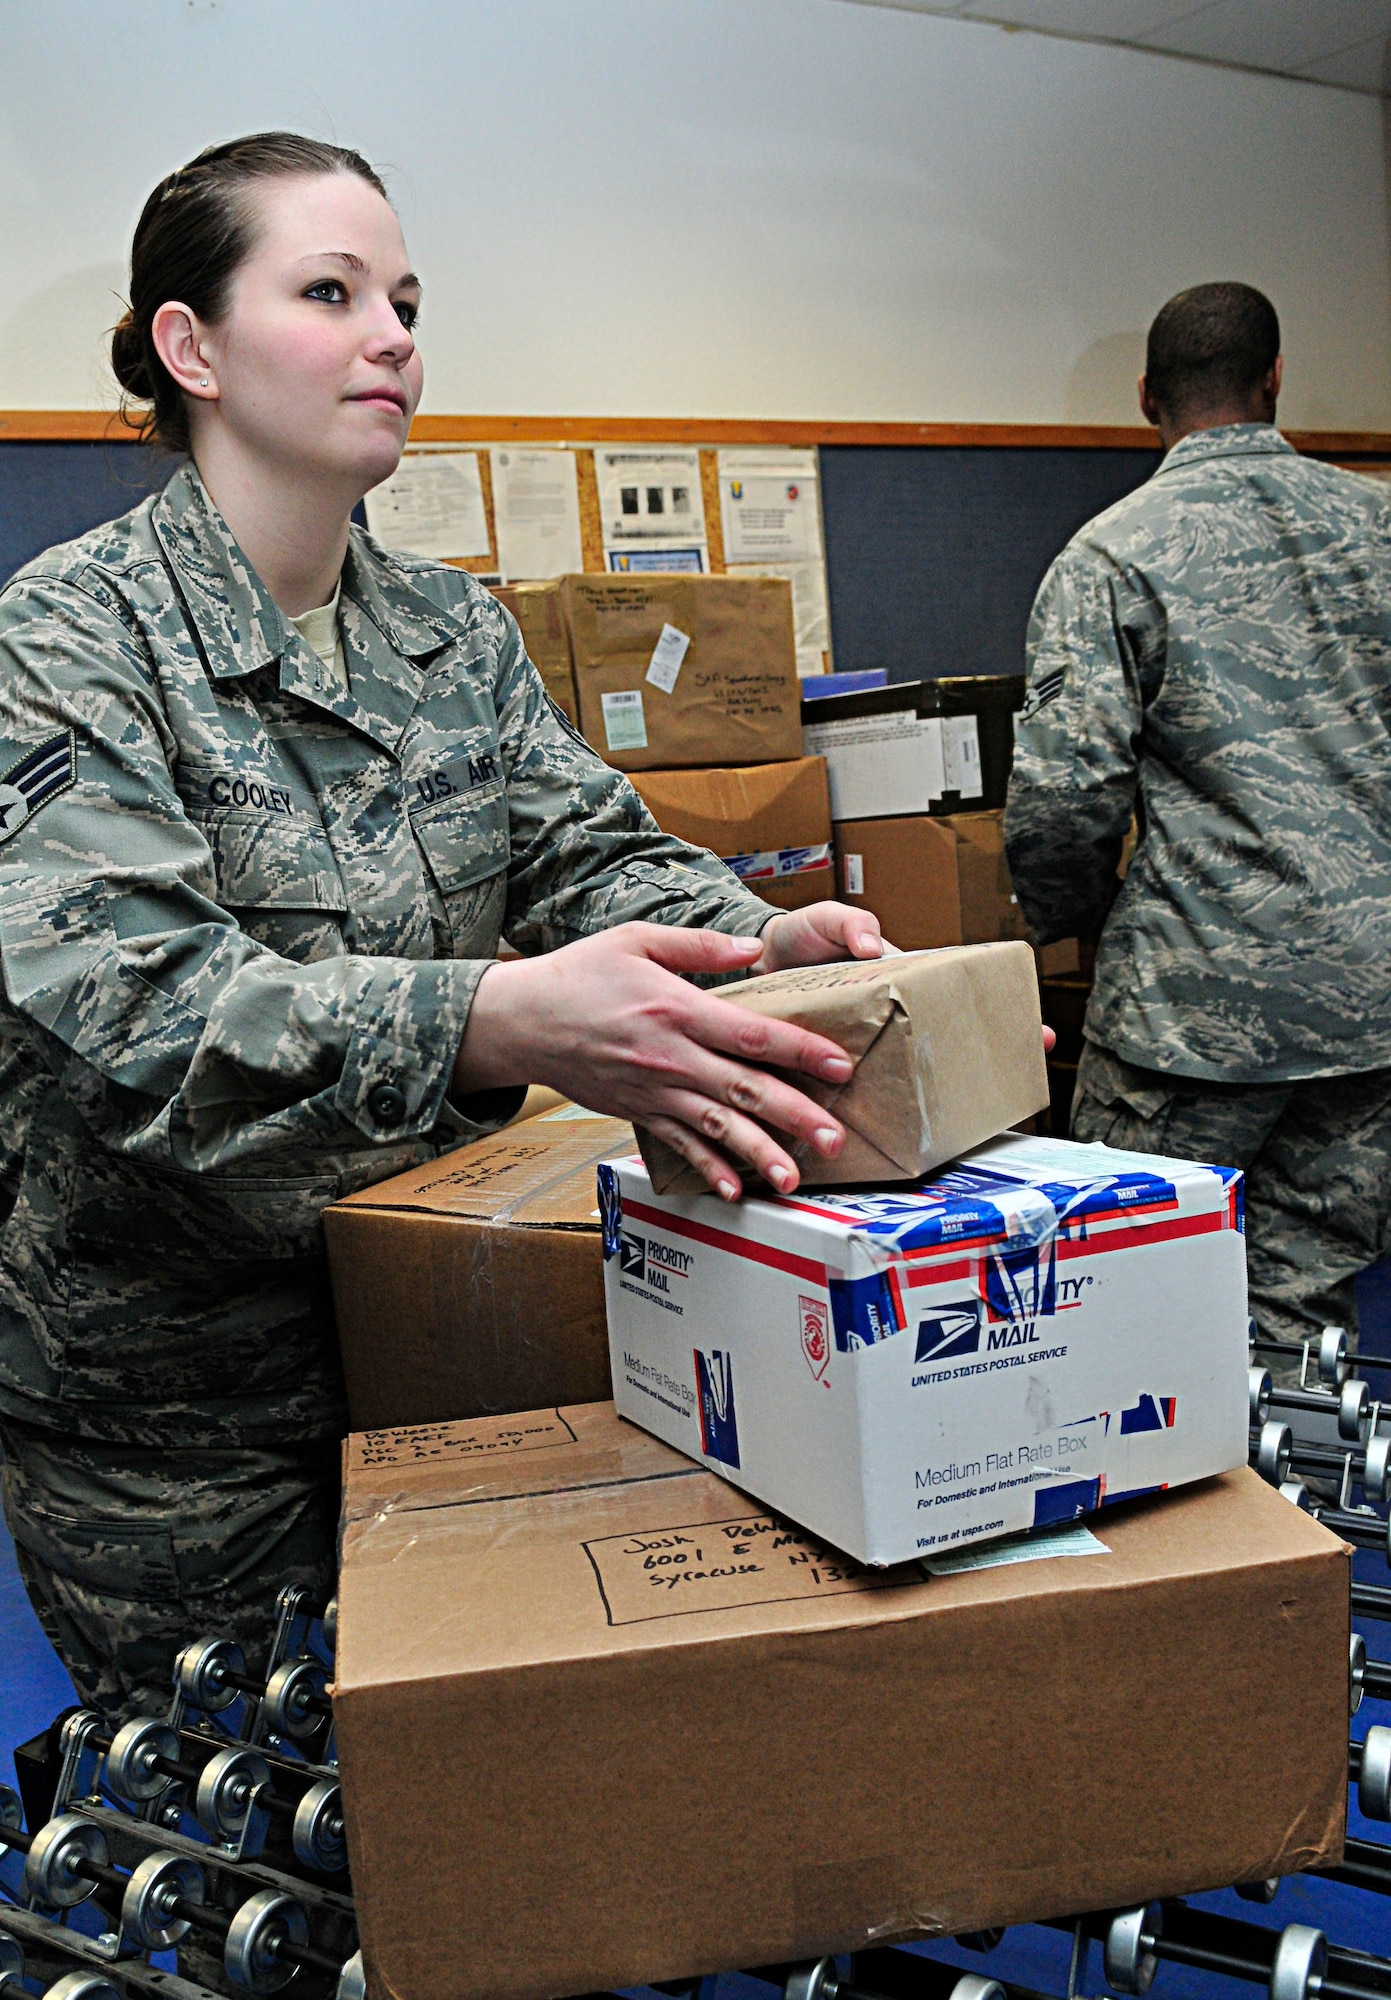 U.S. Air Force Senior Airman Mindi Cooley, 86th Communications Squadron postal clerk, organizes parcels for mailing at the Northside Post Office, Ramstein Air Base, Germany, Feb. 17, 2011. Parcel pick-up is Monday through Friday 10 a.m. - 5:30 p.m., Saturday 10 a.m. - 1 p.m. and closed on Sunday. (U.S. Air Force photo by Airman 1st Class Desiree Esposito)